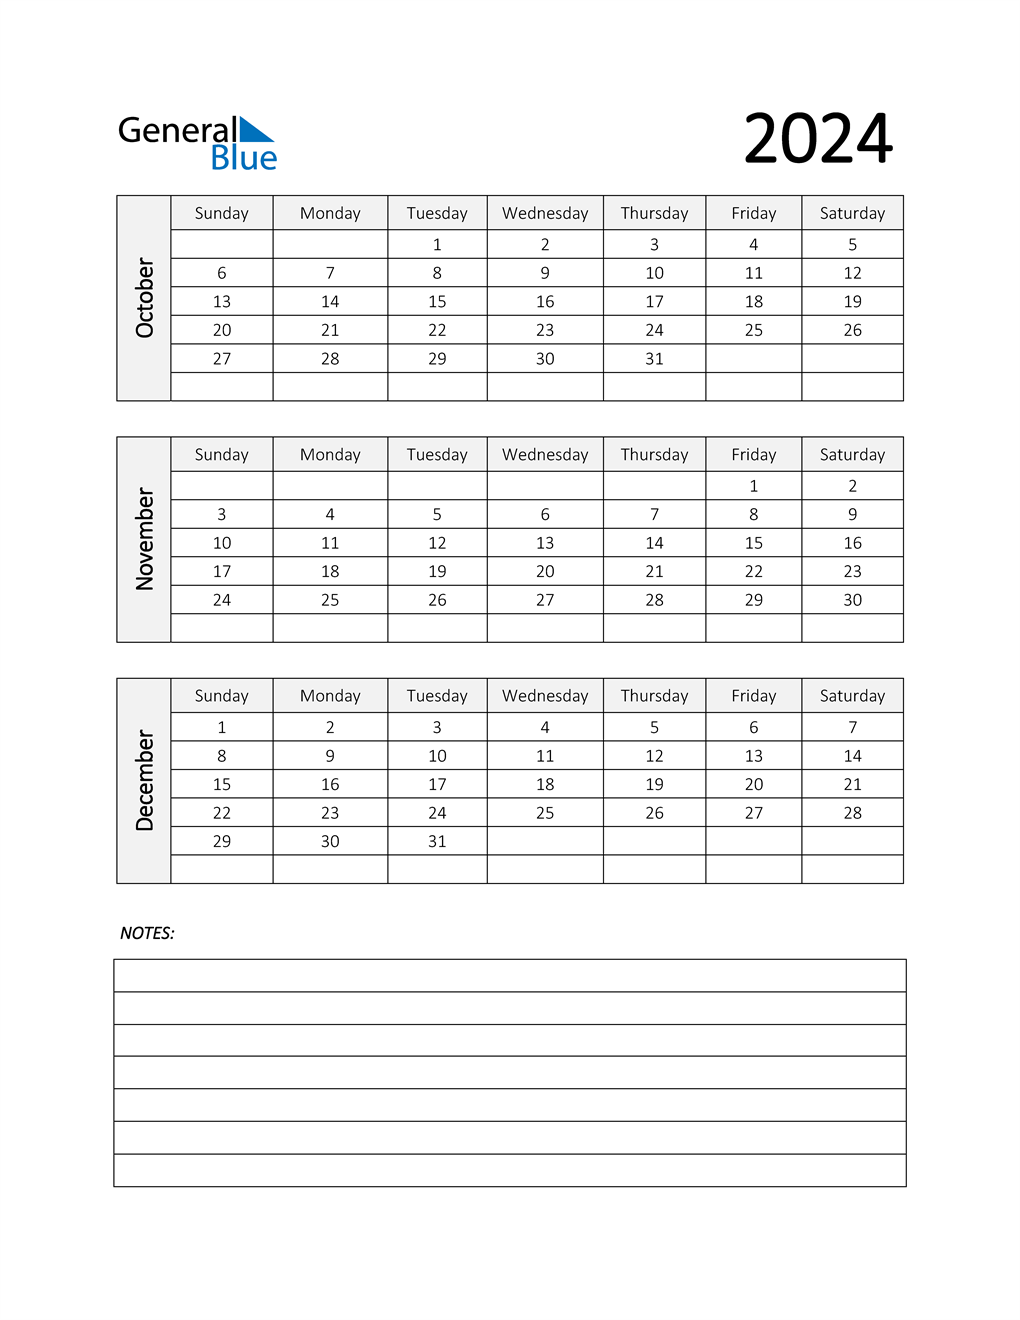  Q4 2024 Calendar with Notes